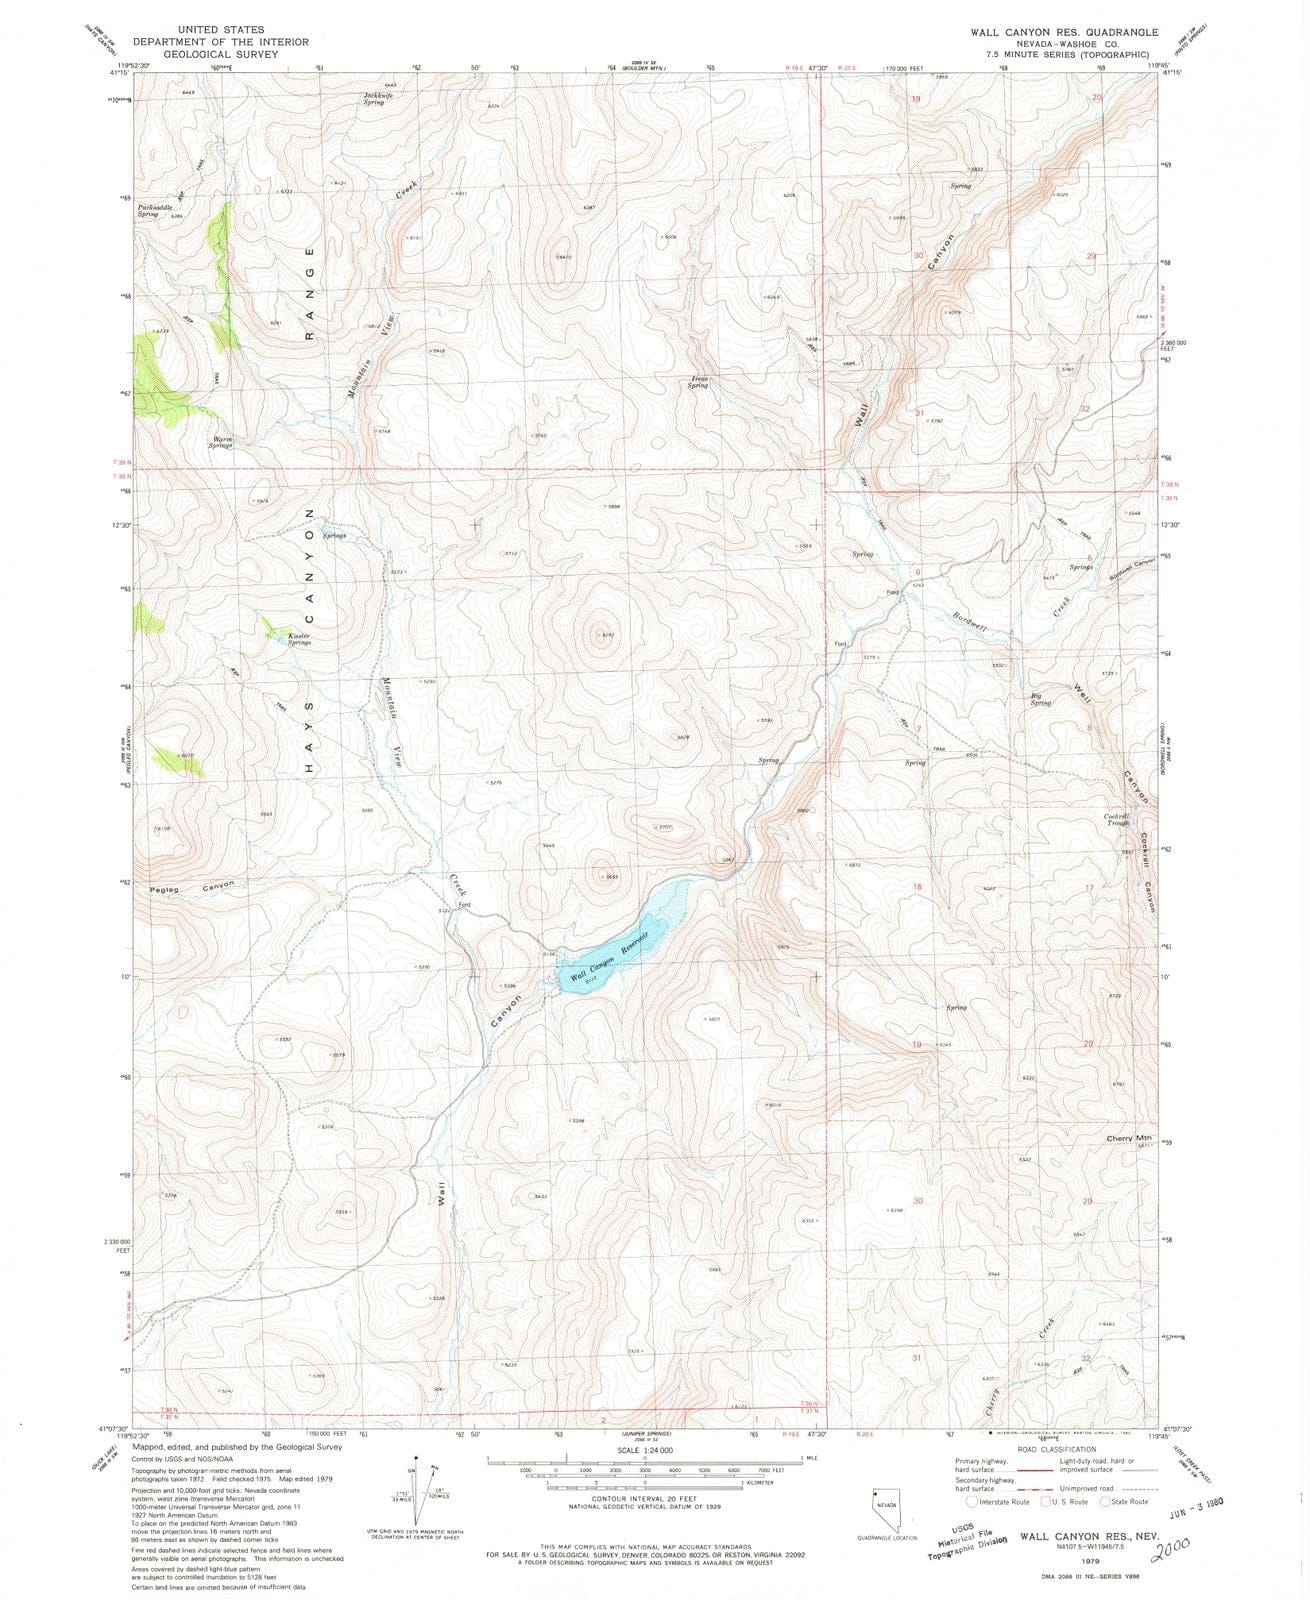 1979 Wall Canyon Reservoir, NV - Nevada - USGS Topographic Map